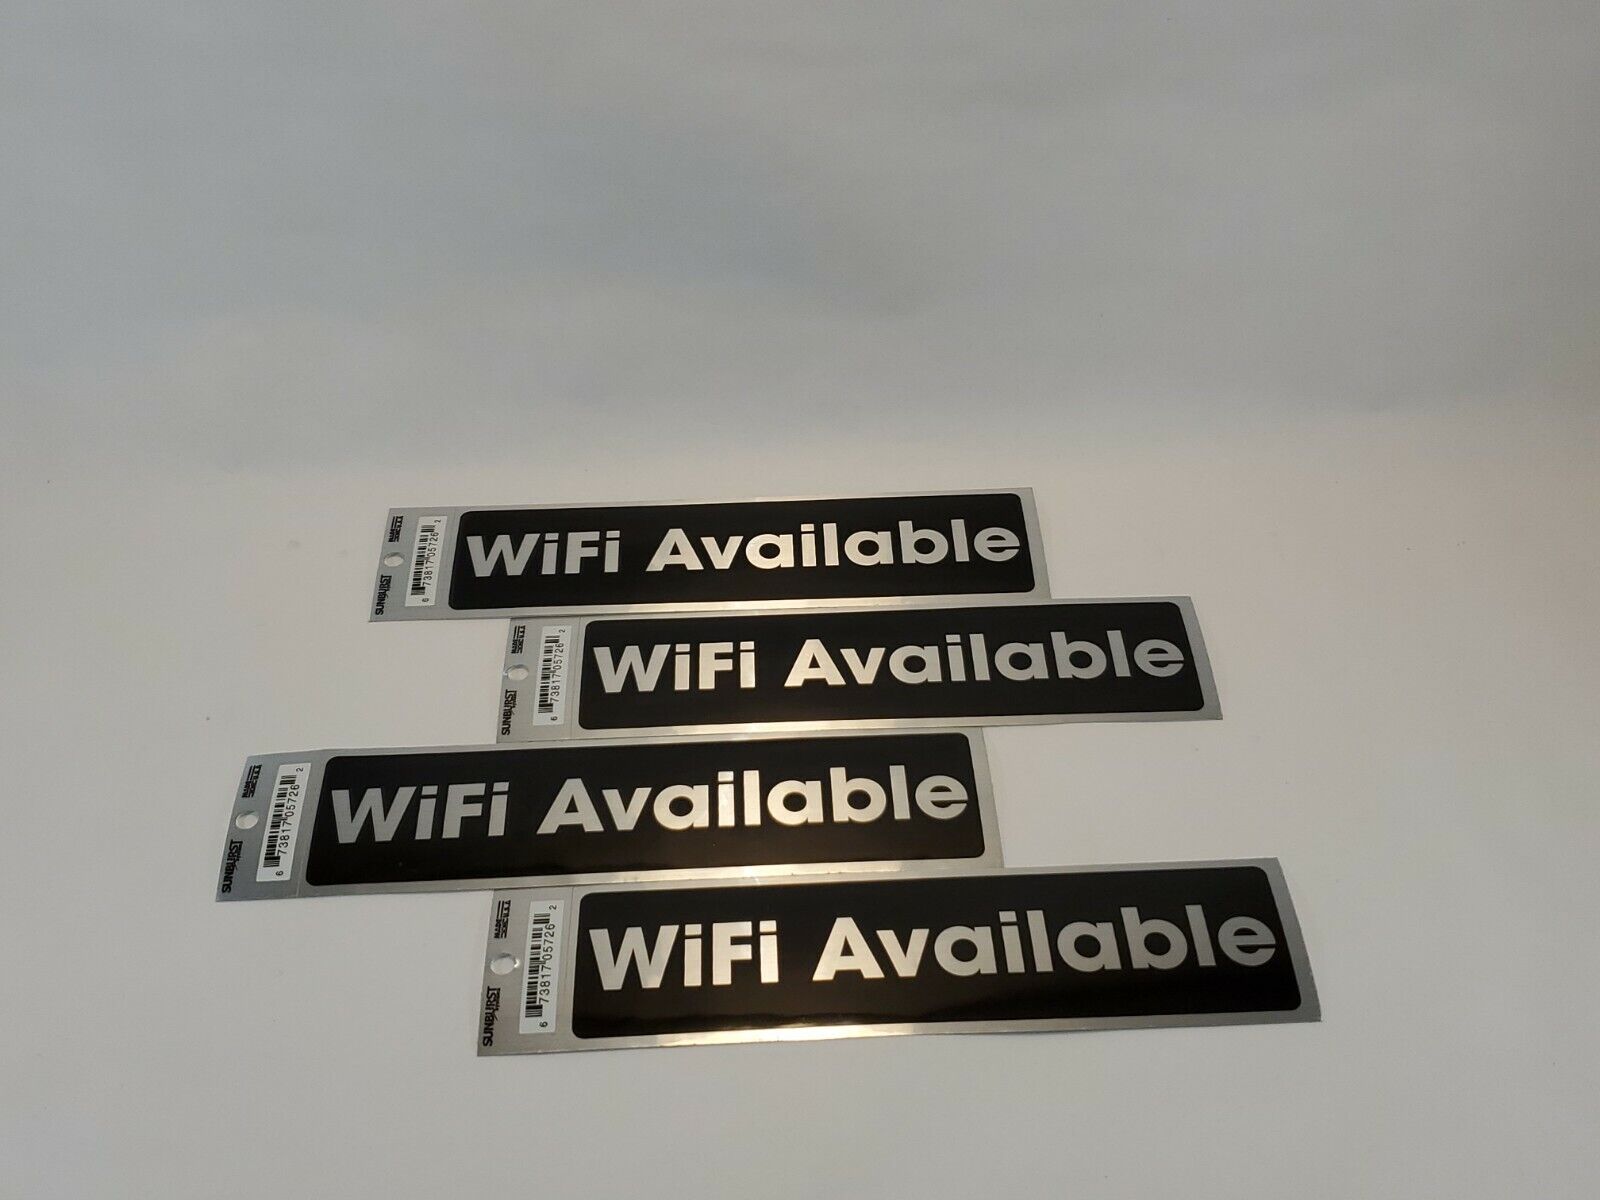  WiFi Available Sign Sticker Decal For Restaurants Businesses Office LOT OF 4  SUNBURST systems